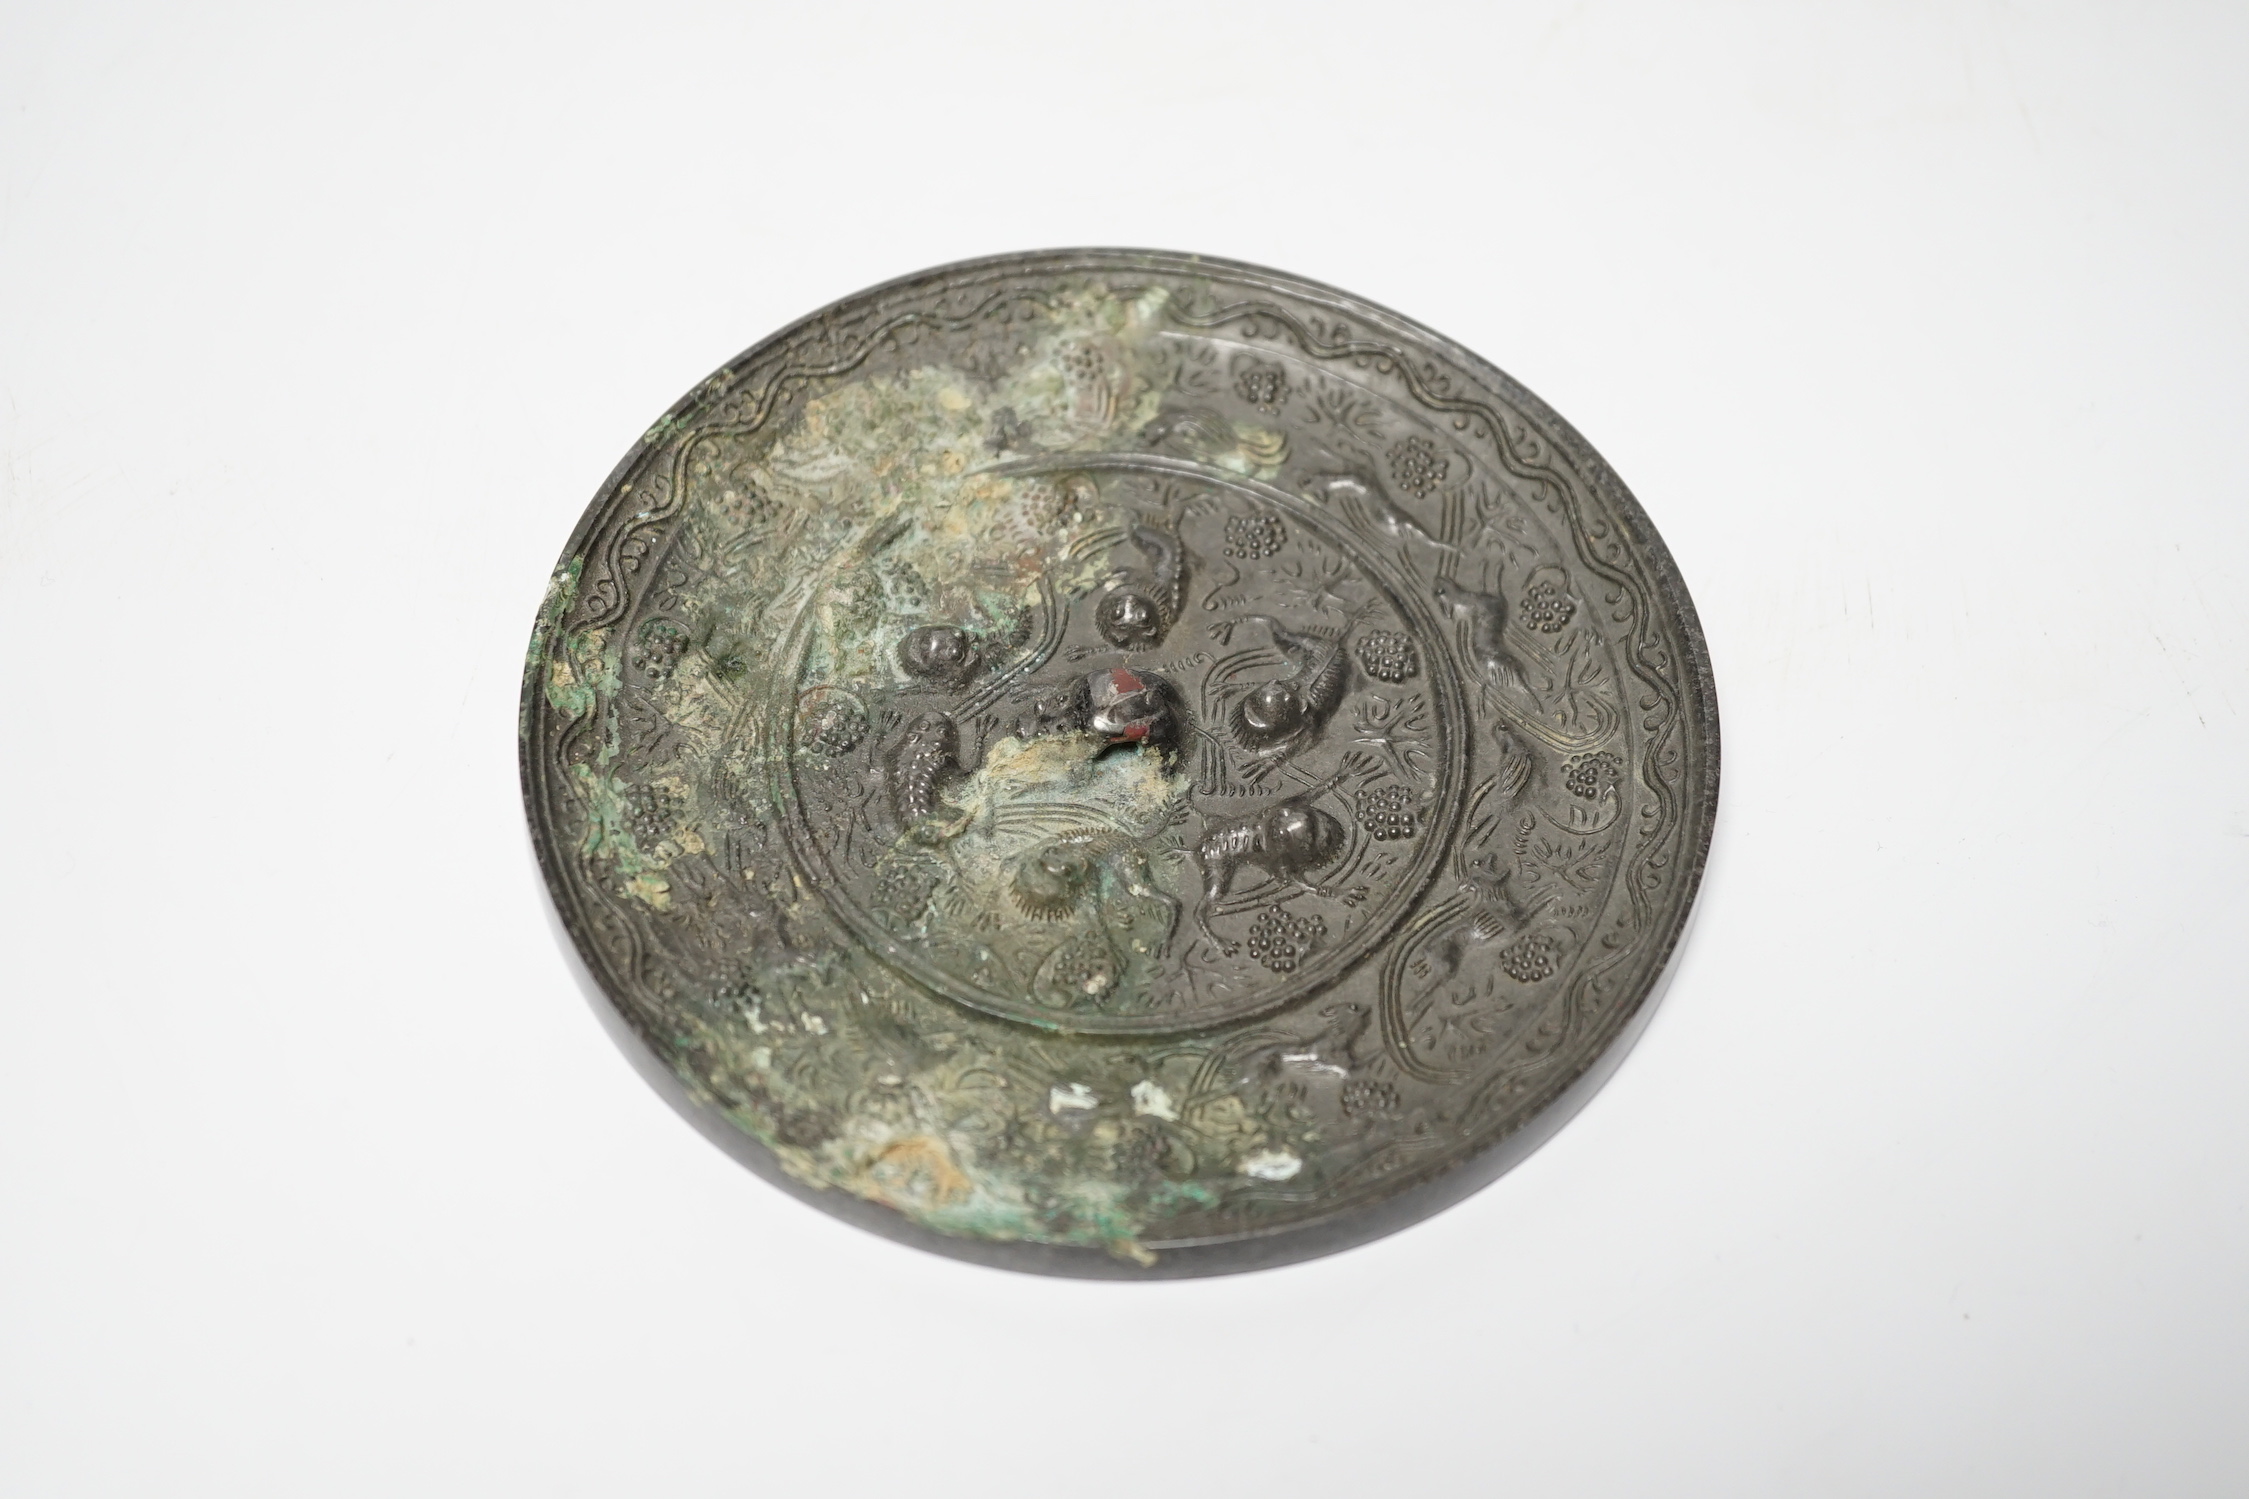 A Chinese cast bronze mirror, decorated with vines, and mythical creatures, diameter 12.5cm - Image 2 of 3